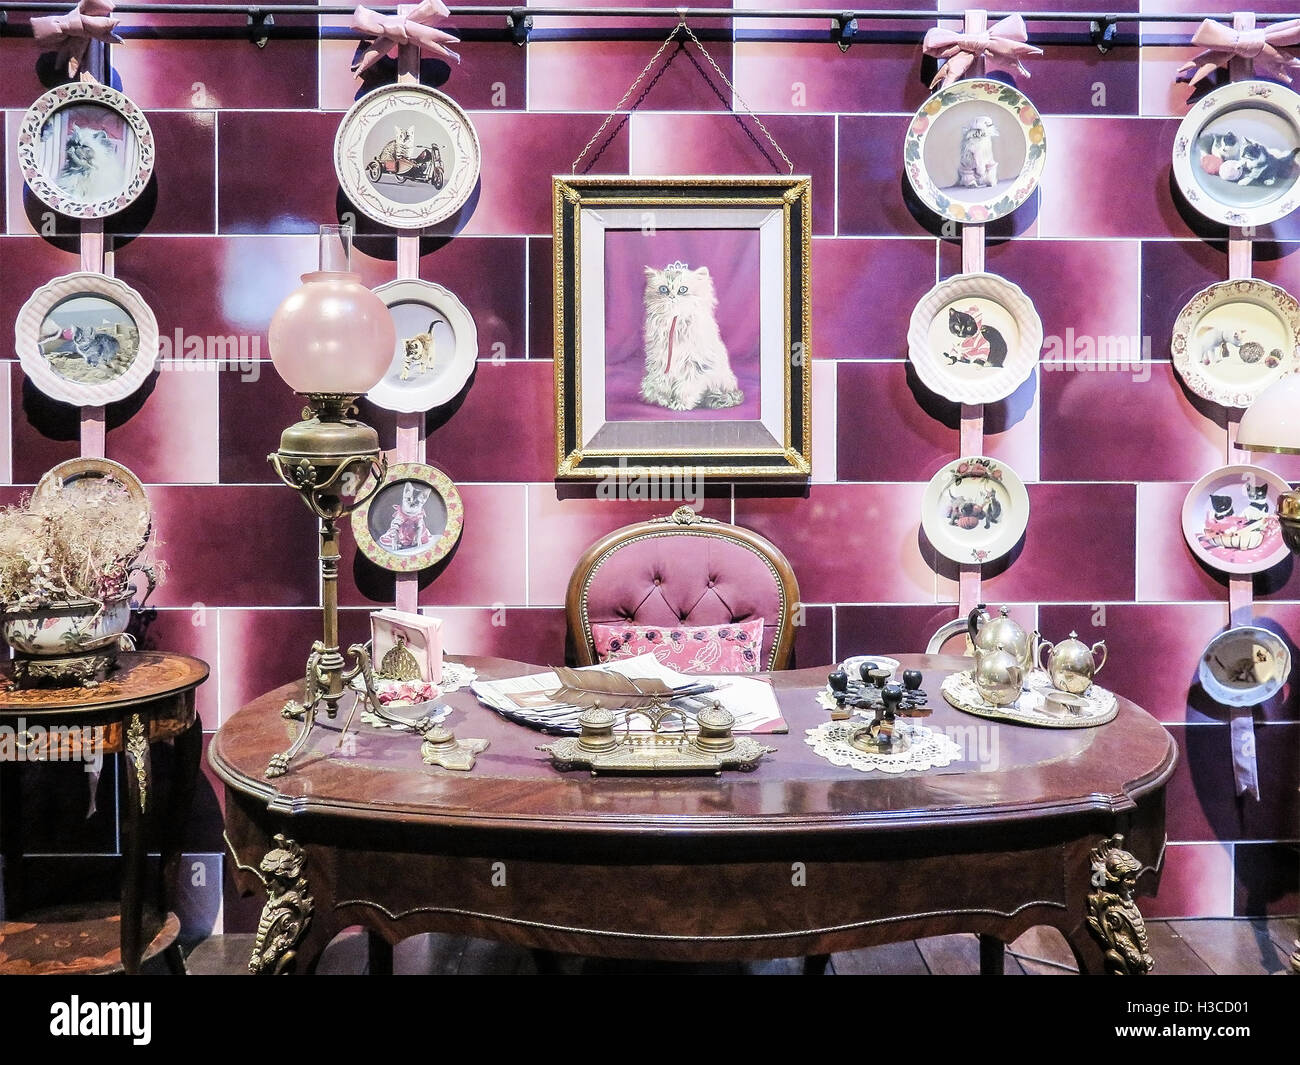 Dolores Umbridge's office from the Harry Potter Film Set in the London